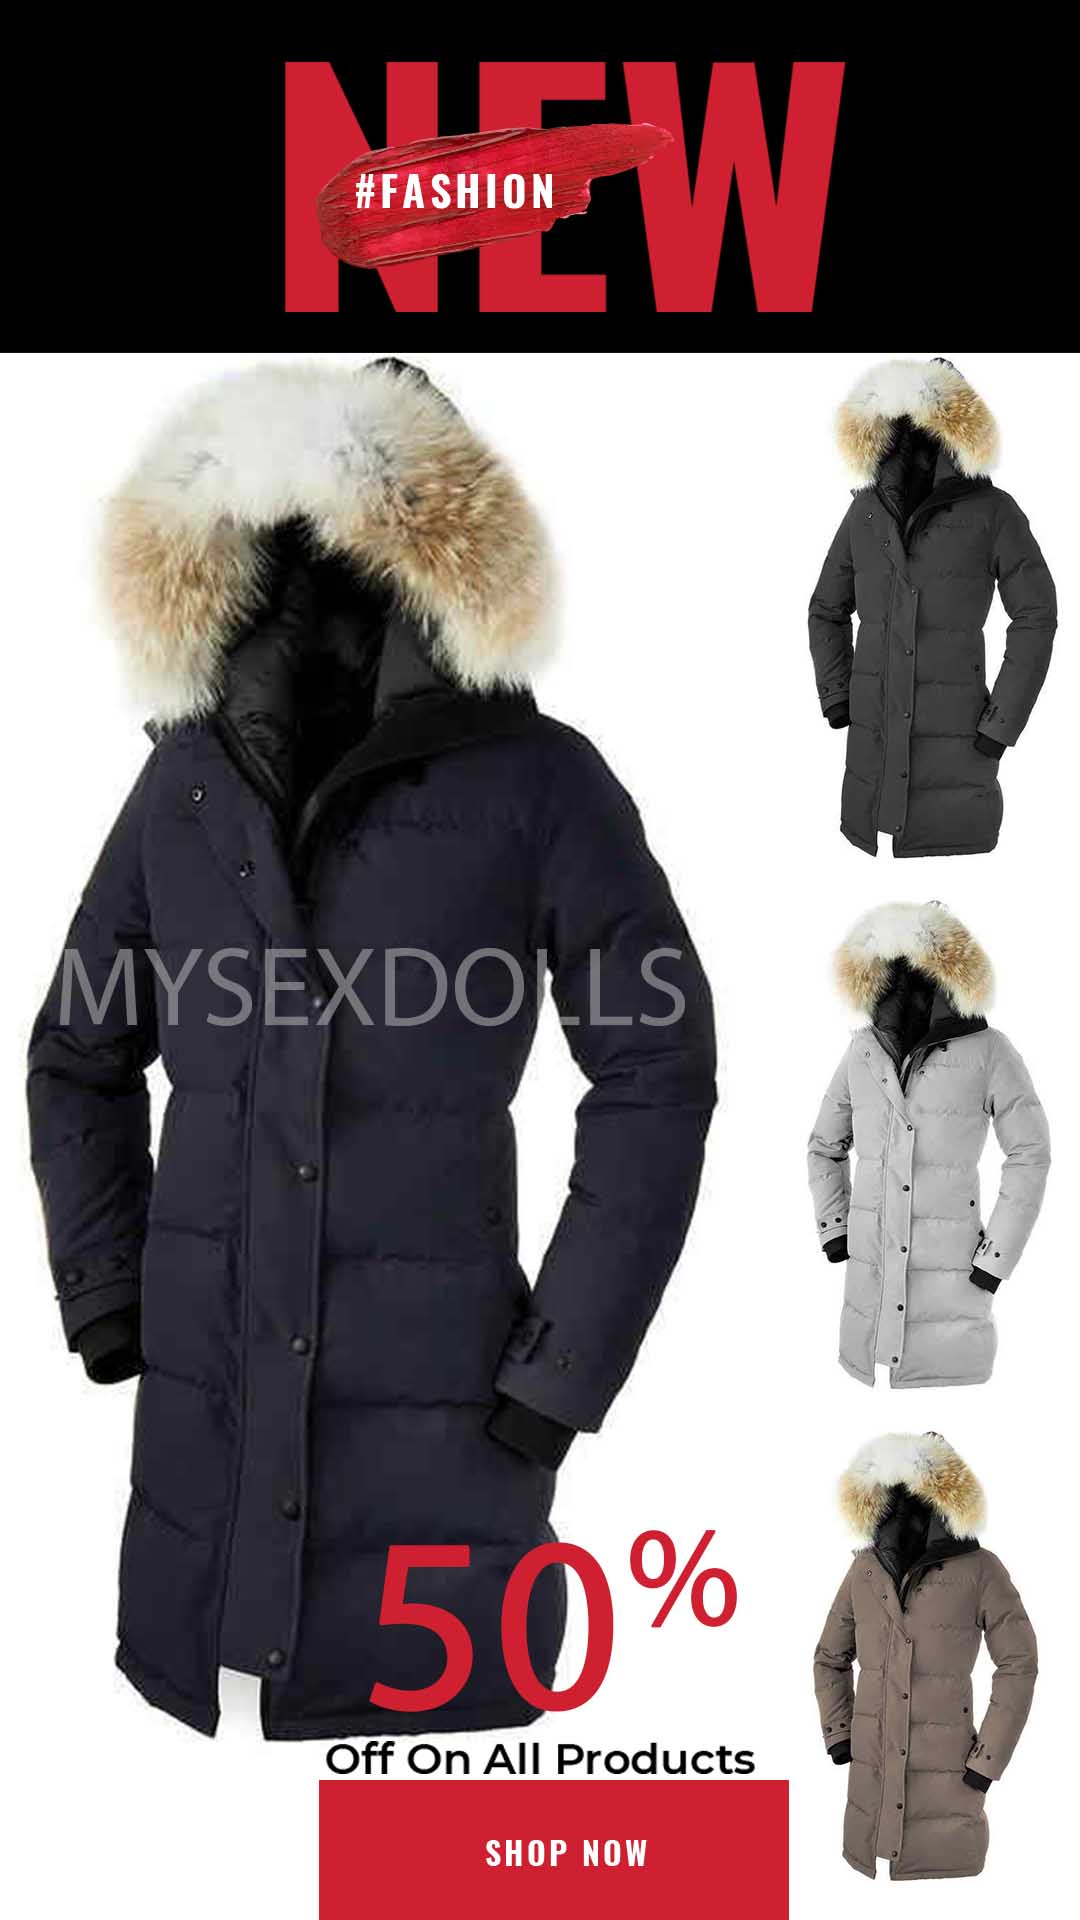 Image of Coat Women WINTER down jacket with HOOD/Snowdome jackets Real wolf fur Collar Duck parkas factory clear coats Windbreaker Warm Zipper Thick parka